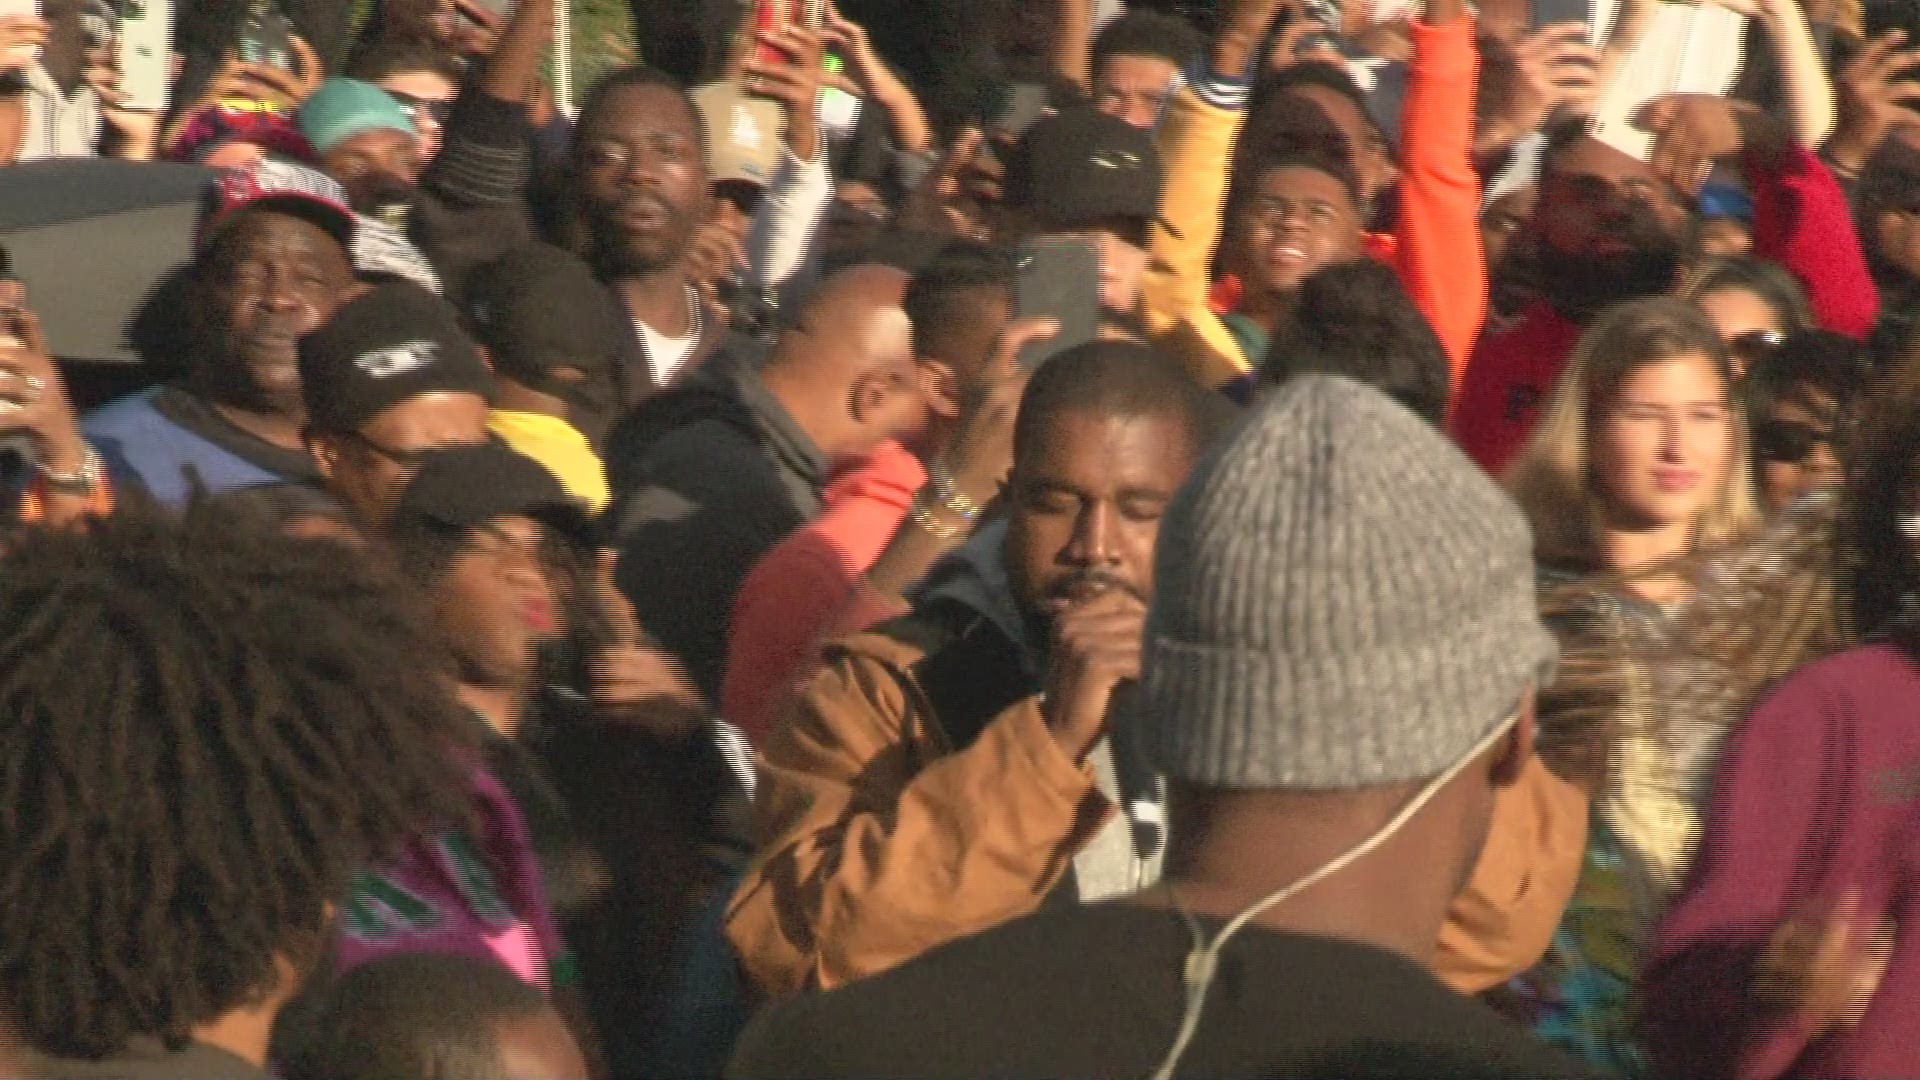 Kanye West surprised Howard University students on Saturday during their homecoming.